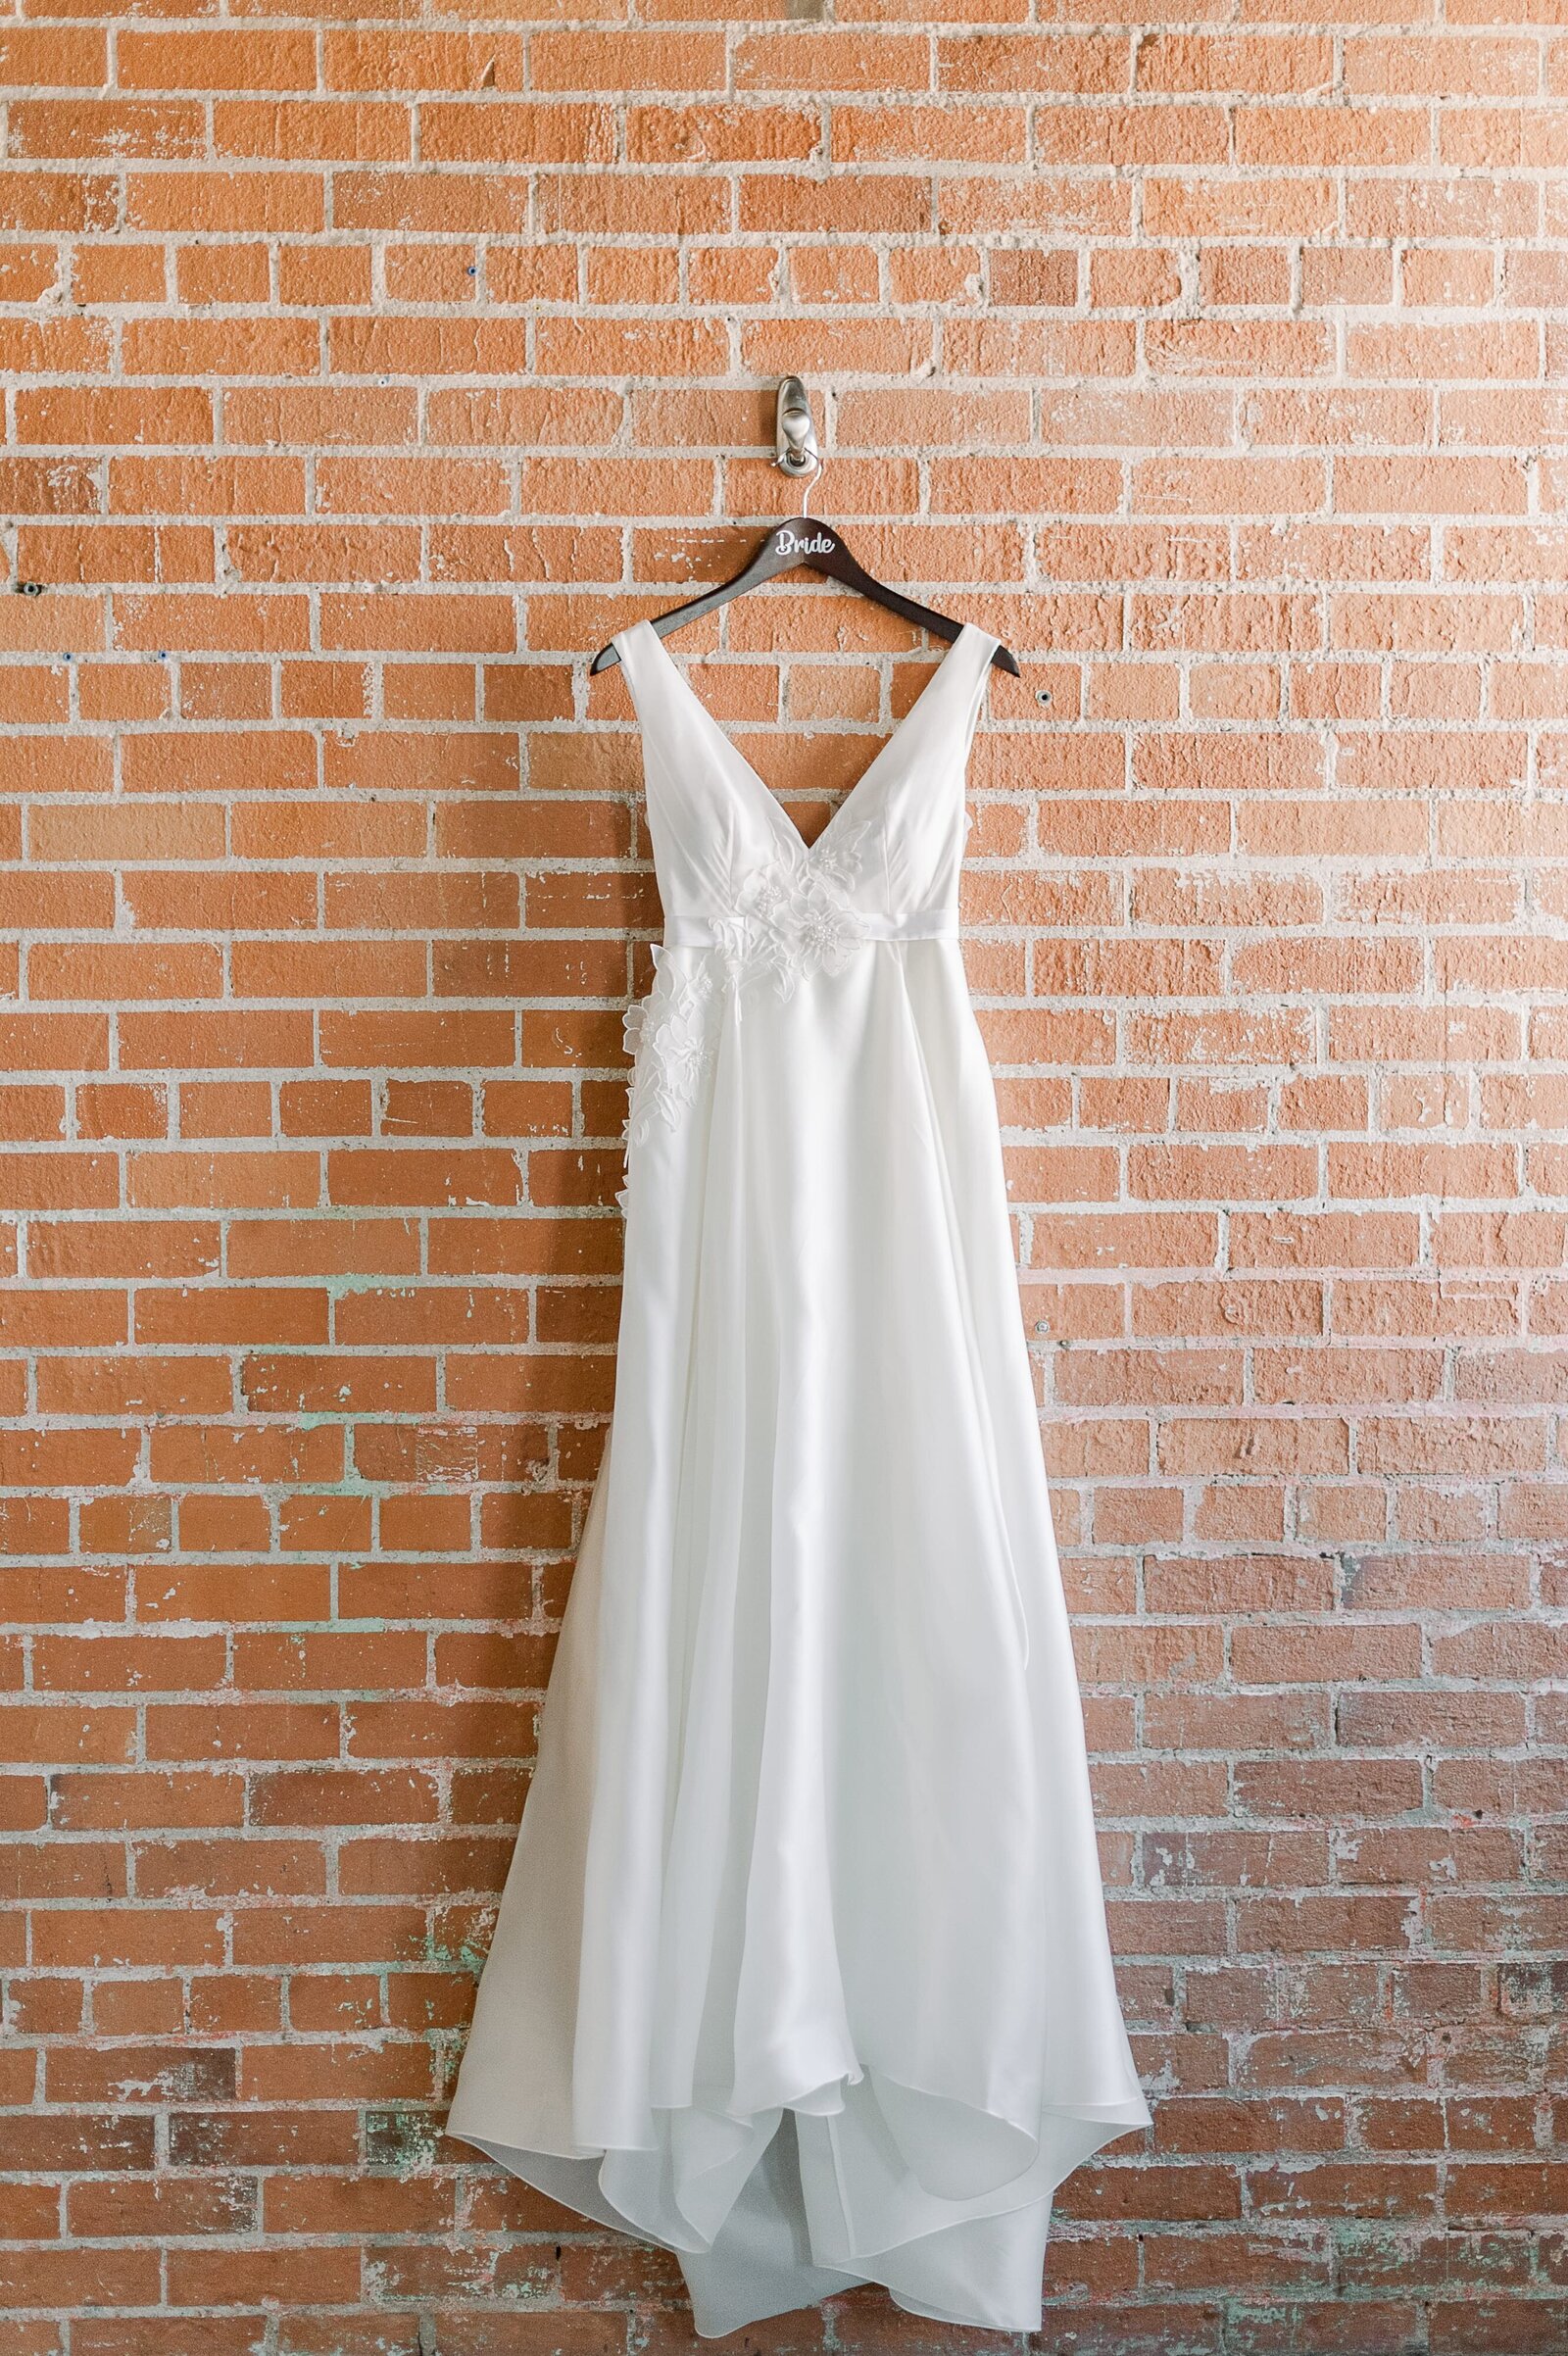 Bride gown on brick wall.